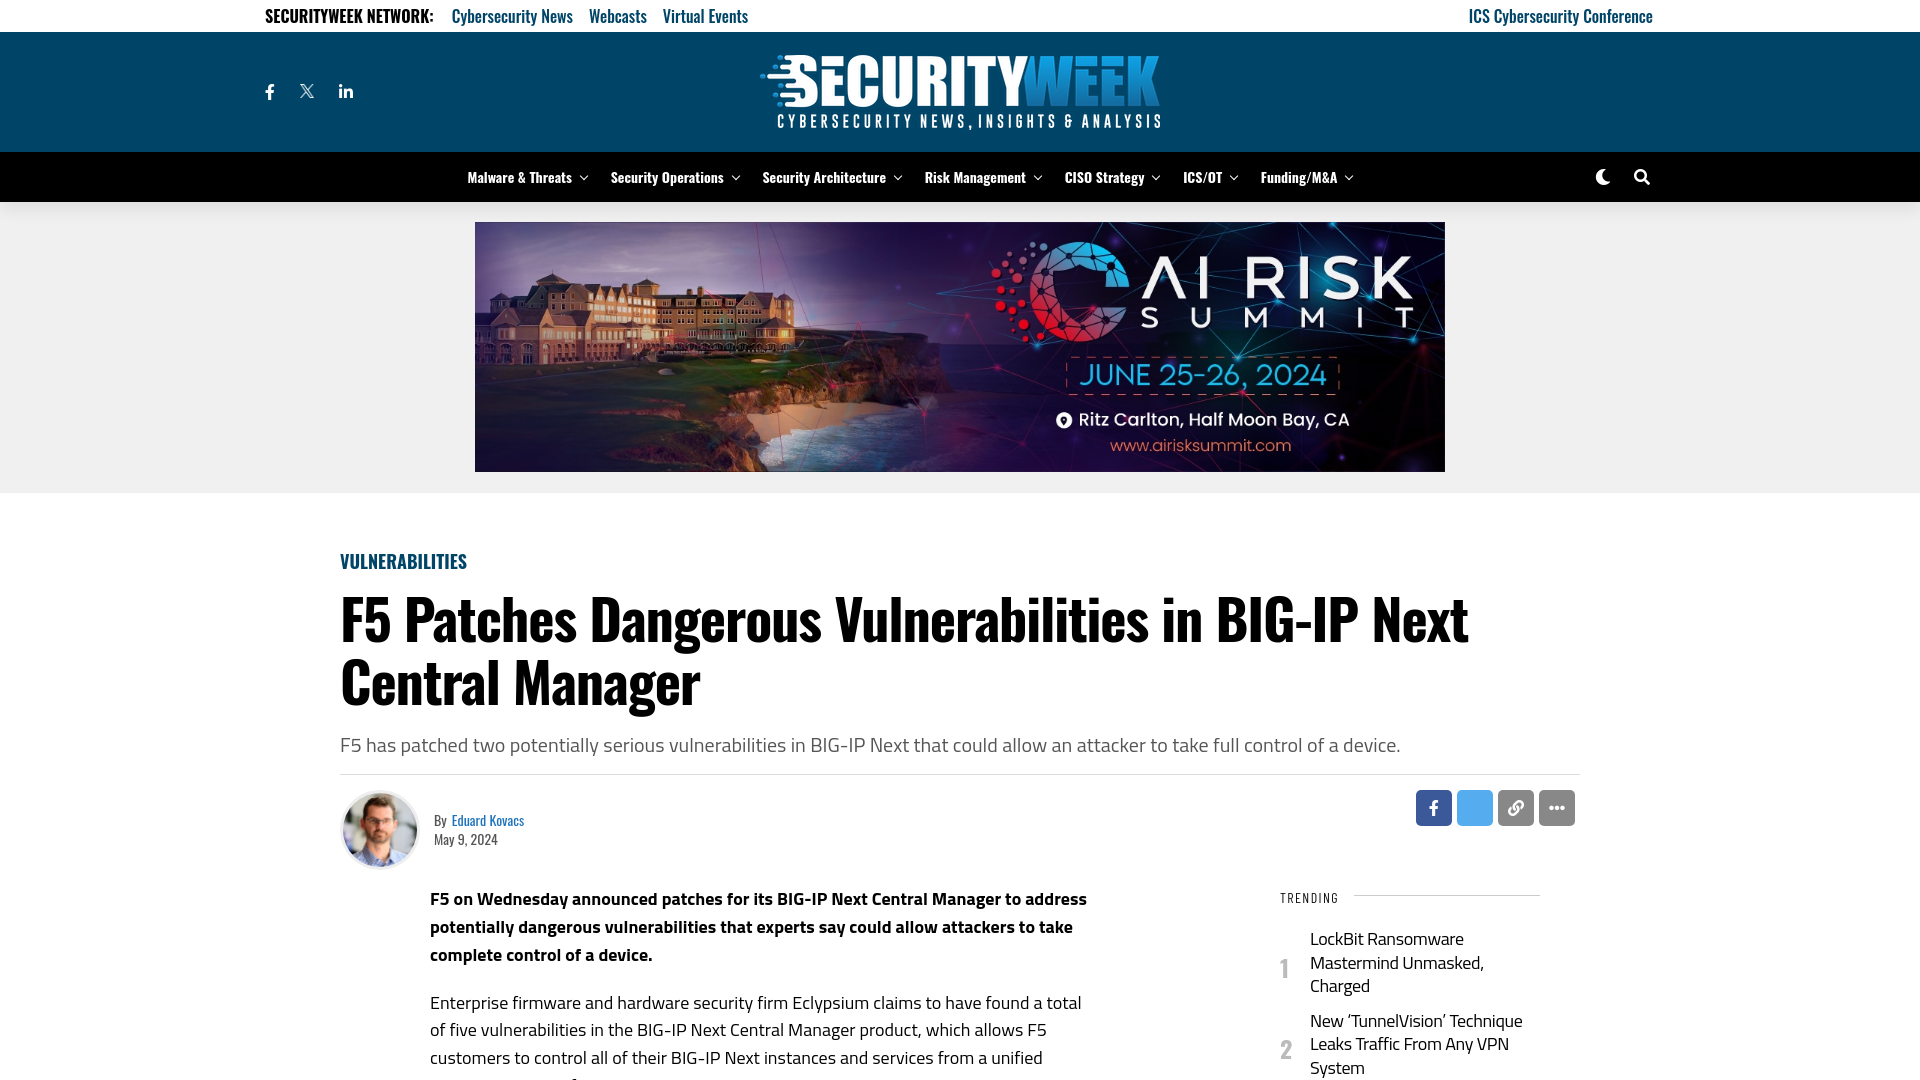 F5 Patches Dangerous Vulnerabilities in BIG-IP Next Central Manager - SecurityWeek